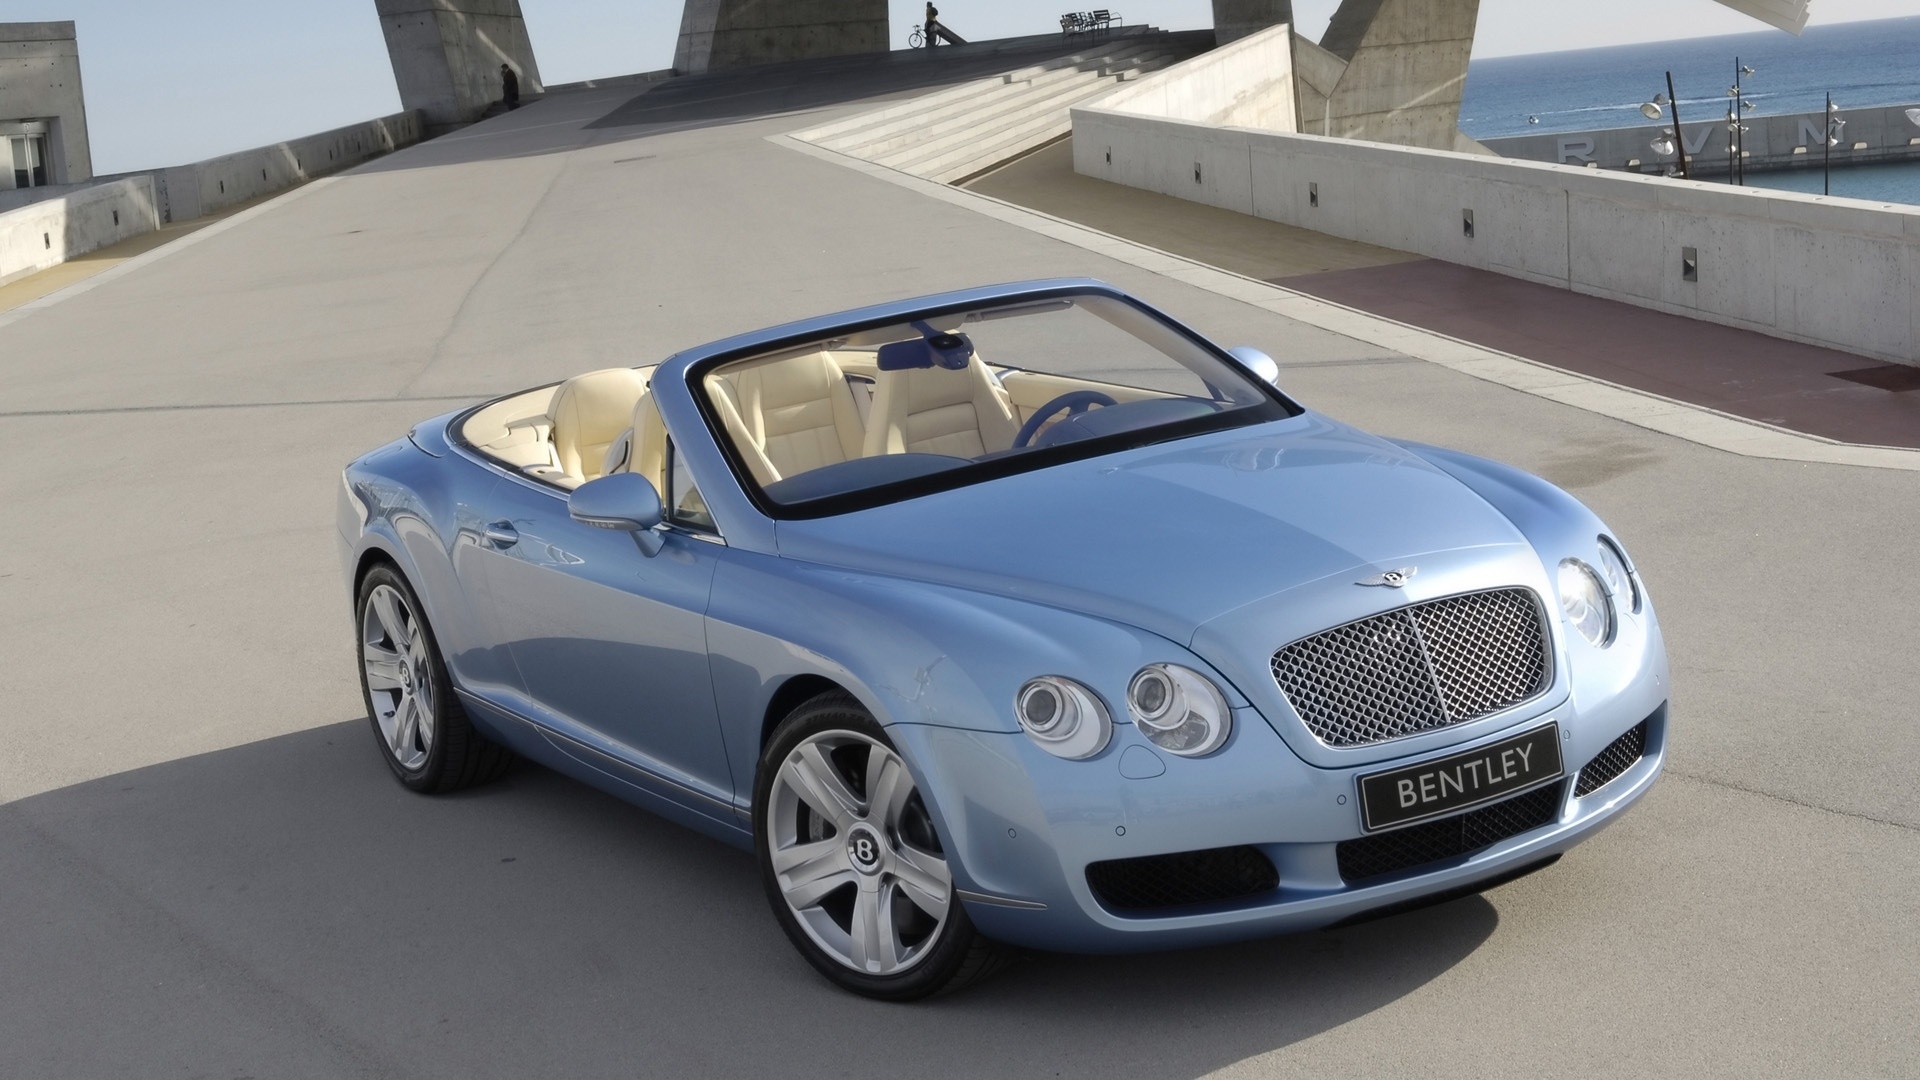 Bentley Continental GTC 2007 for 1920 x 1080 HDTV 1080p resolution